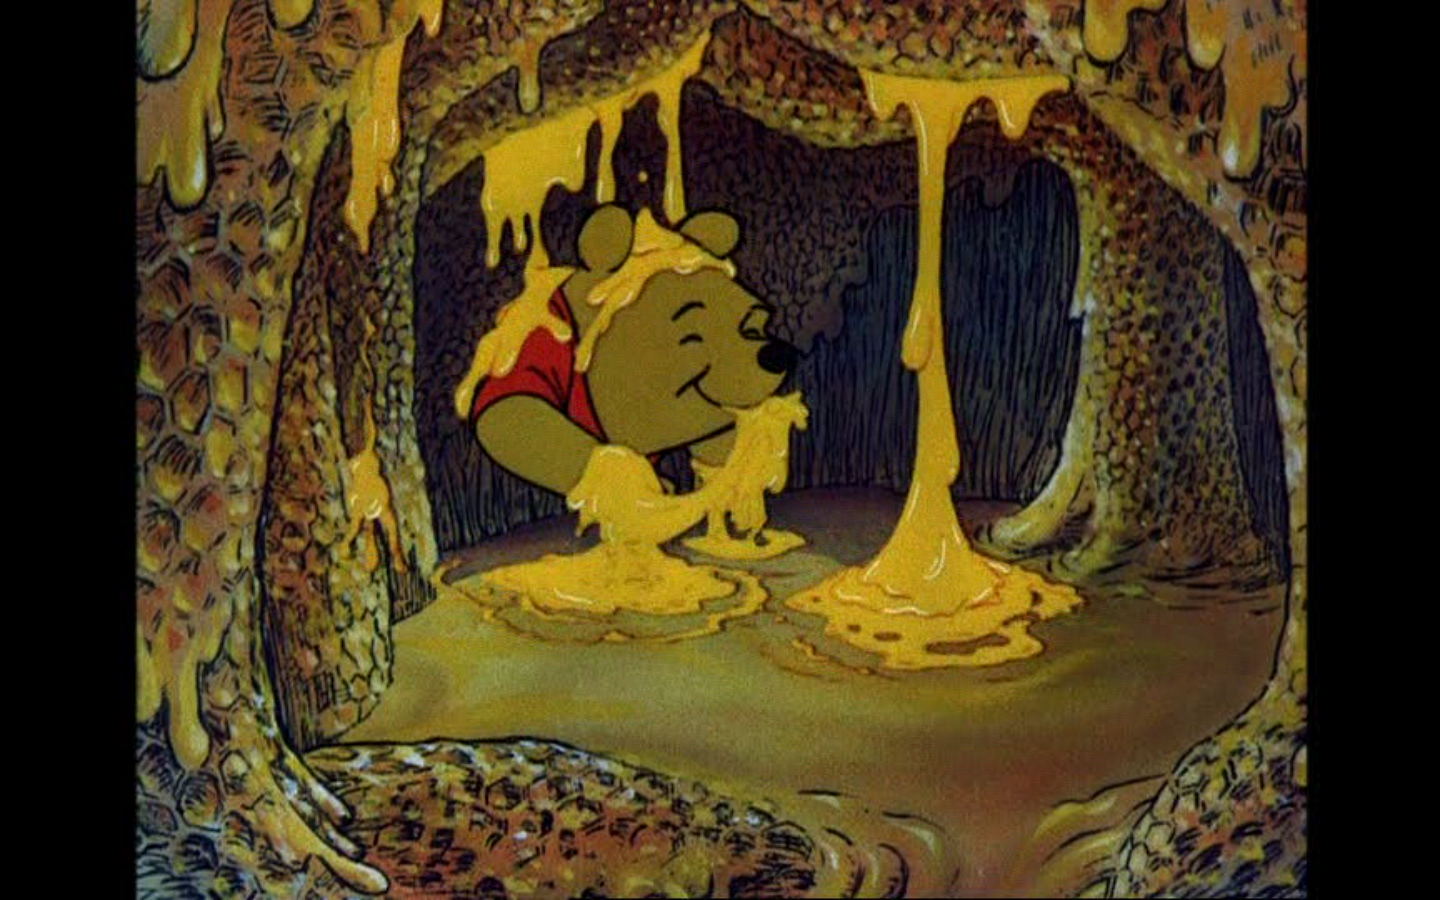 the-many-adventures-of-winnie-the-pooh-5